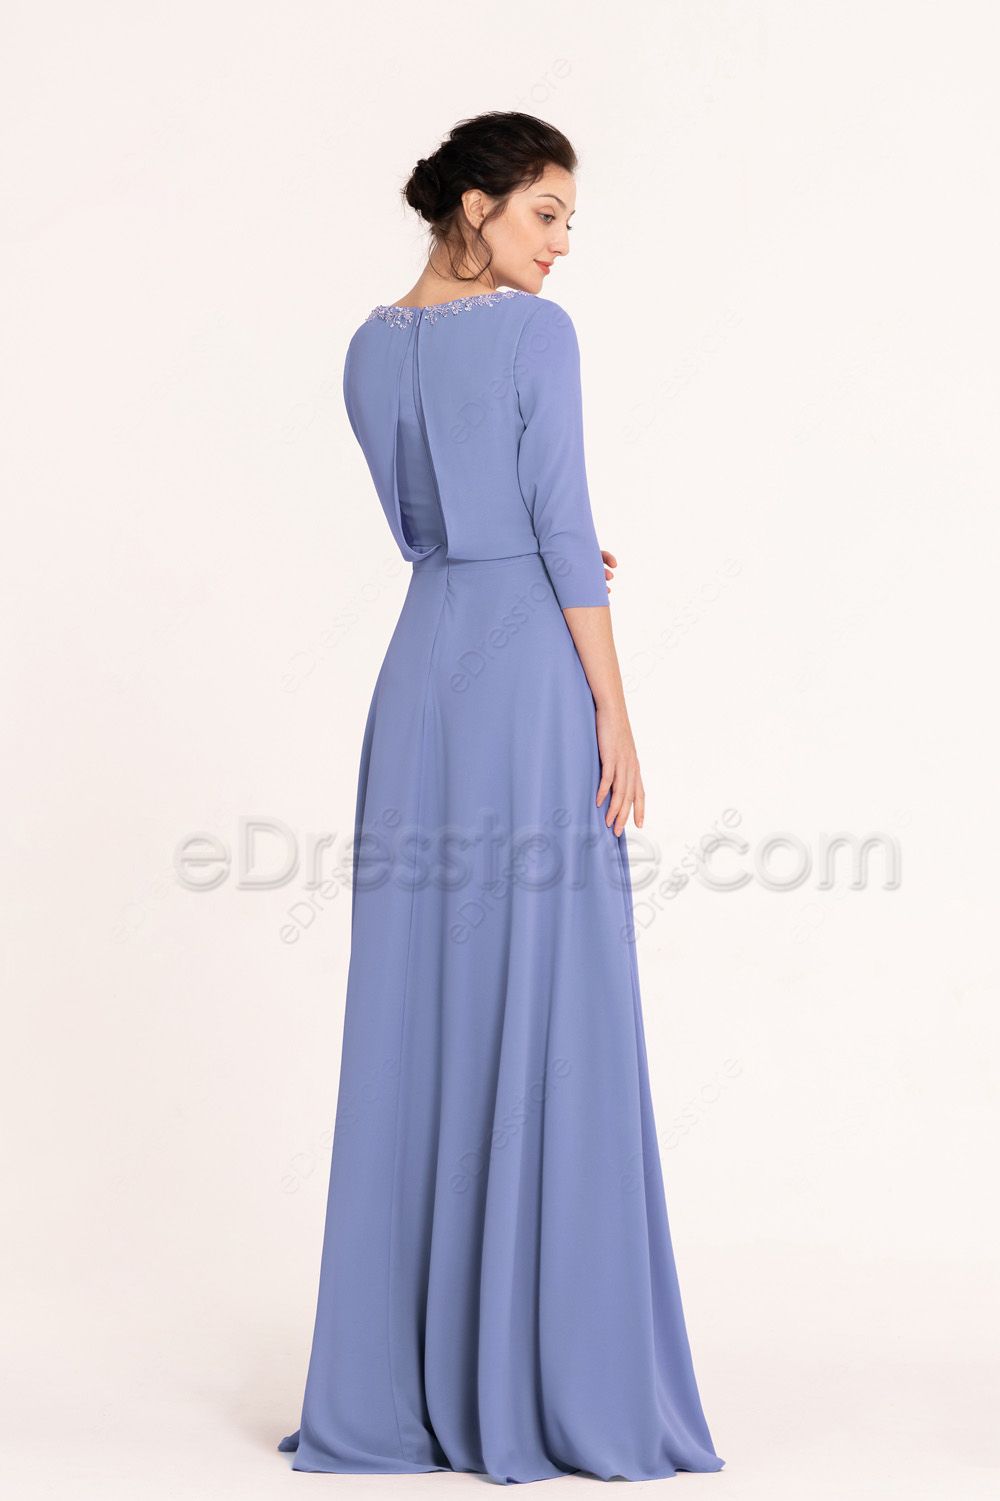 Modest LDS Beaded Periwinkle Bridesmaid Dresses with Sleeves | eDresstore